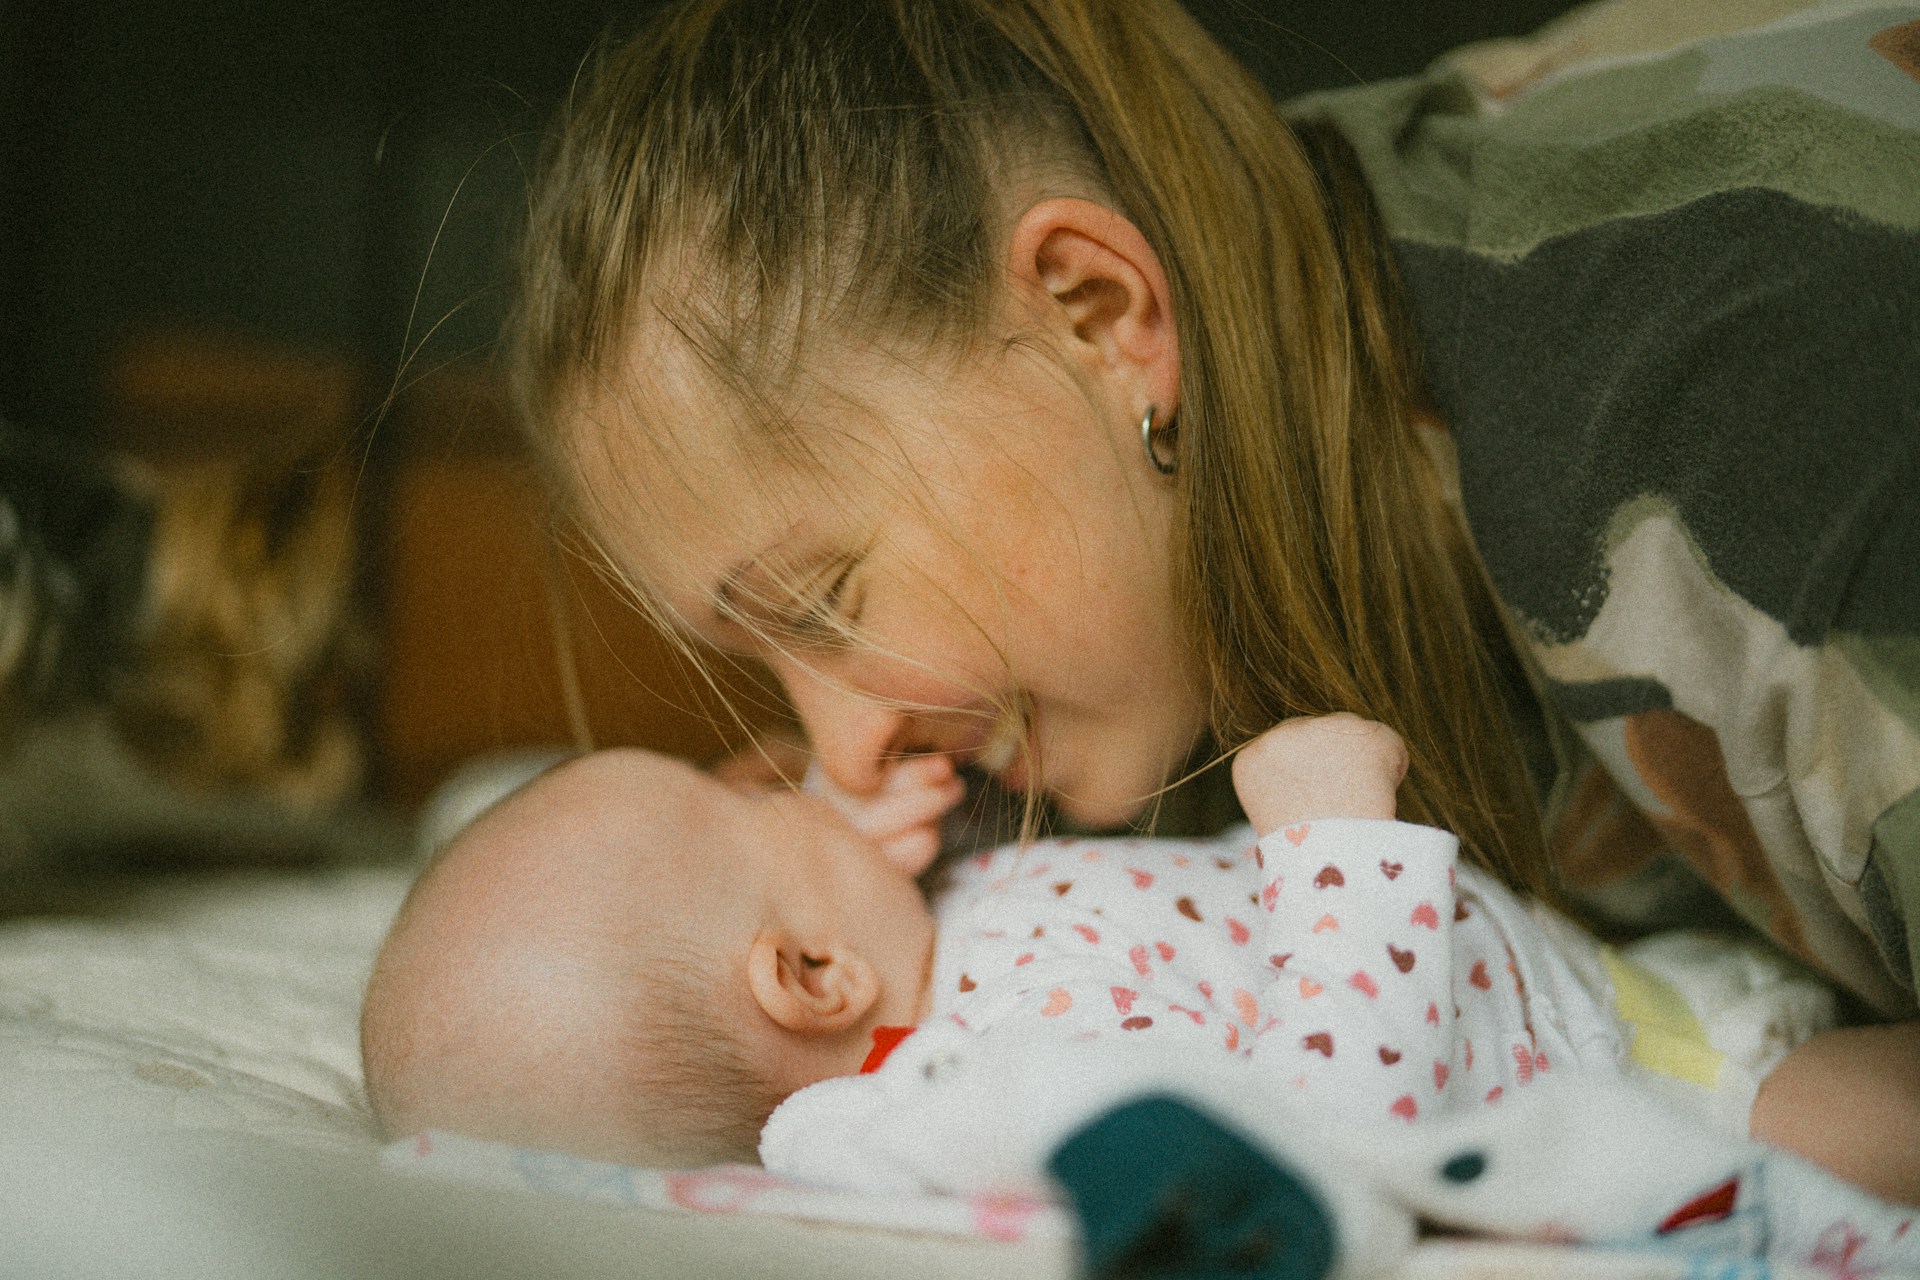 Watching my wife become a mom gave me a new appreciation of a mother’s sacrificial love